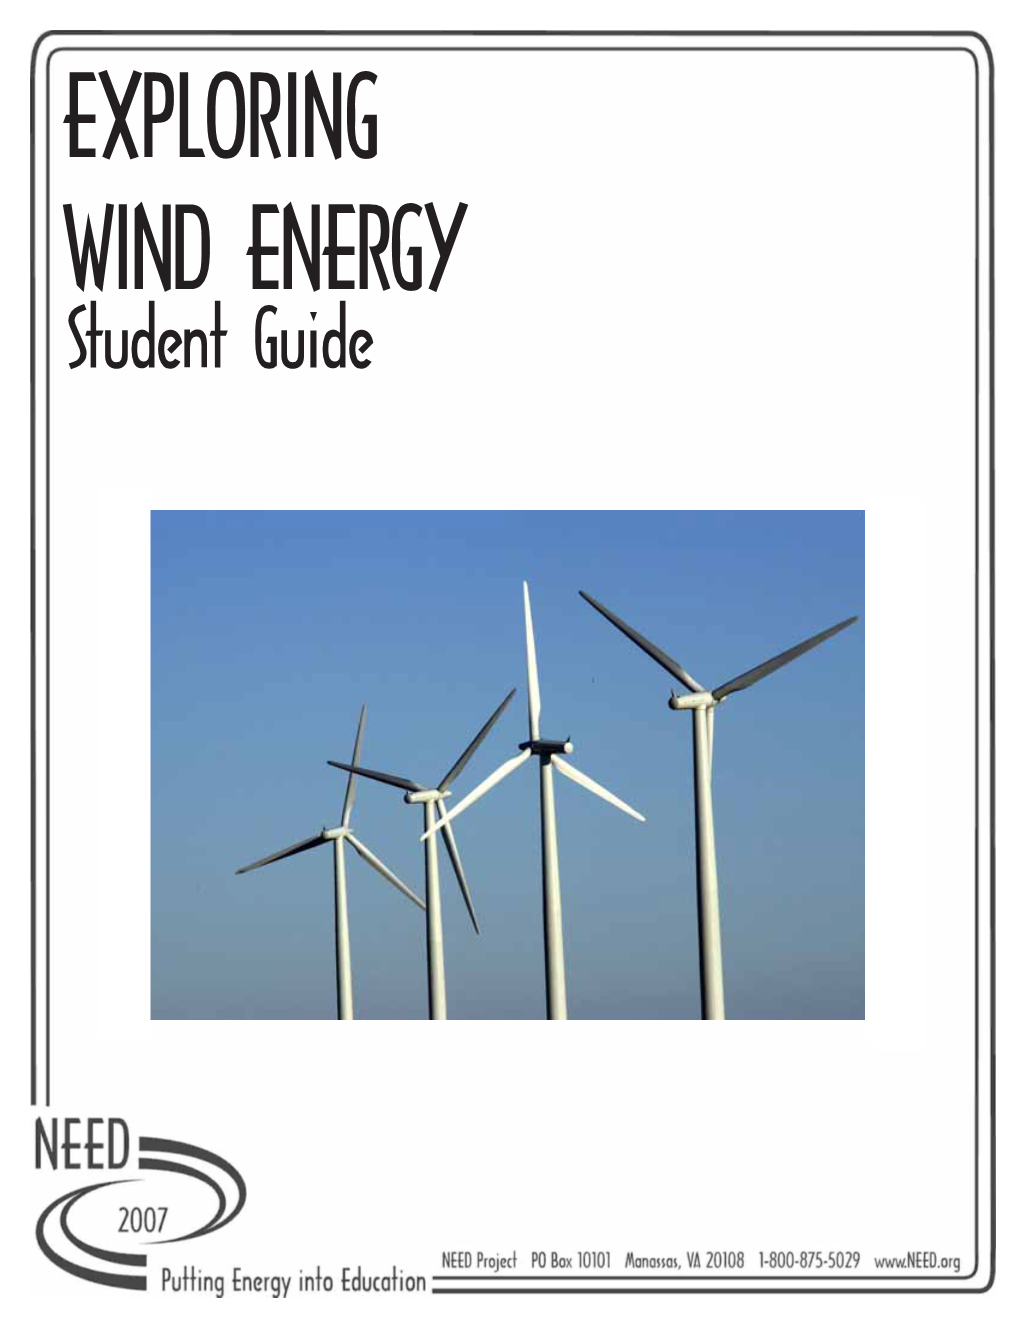 WIND ENERGY Student Guide Evolution of the Windmill Tower the Earliest European Windmills, Built in the 1200S, Were Called Postmills